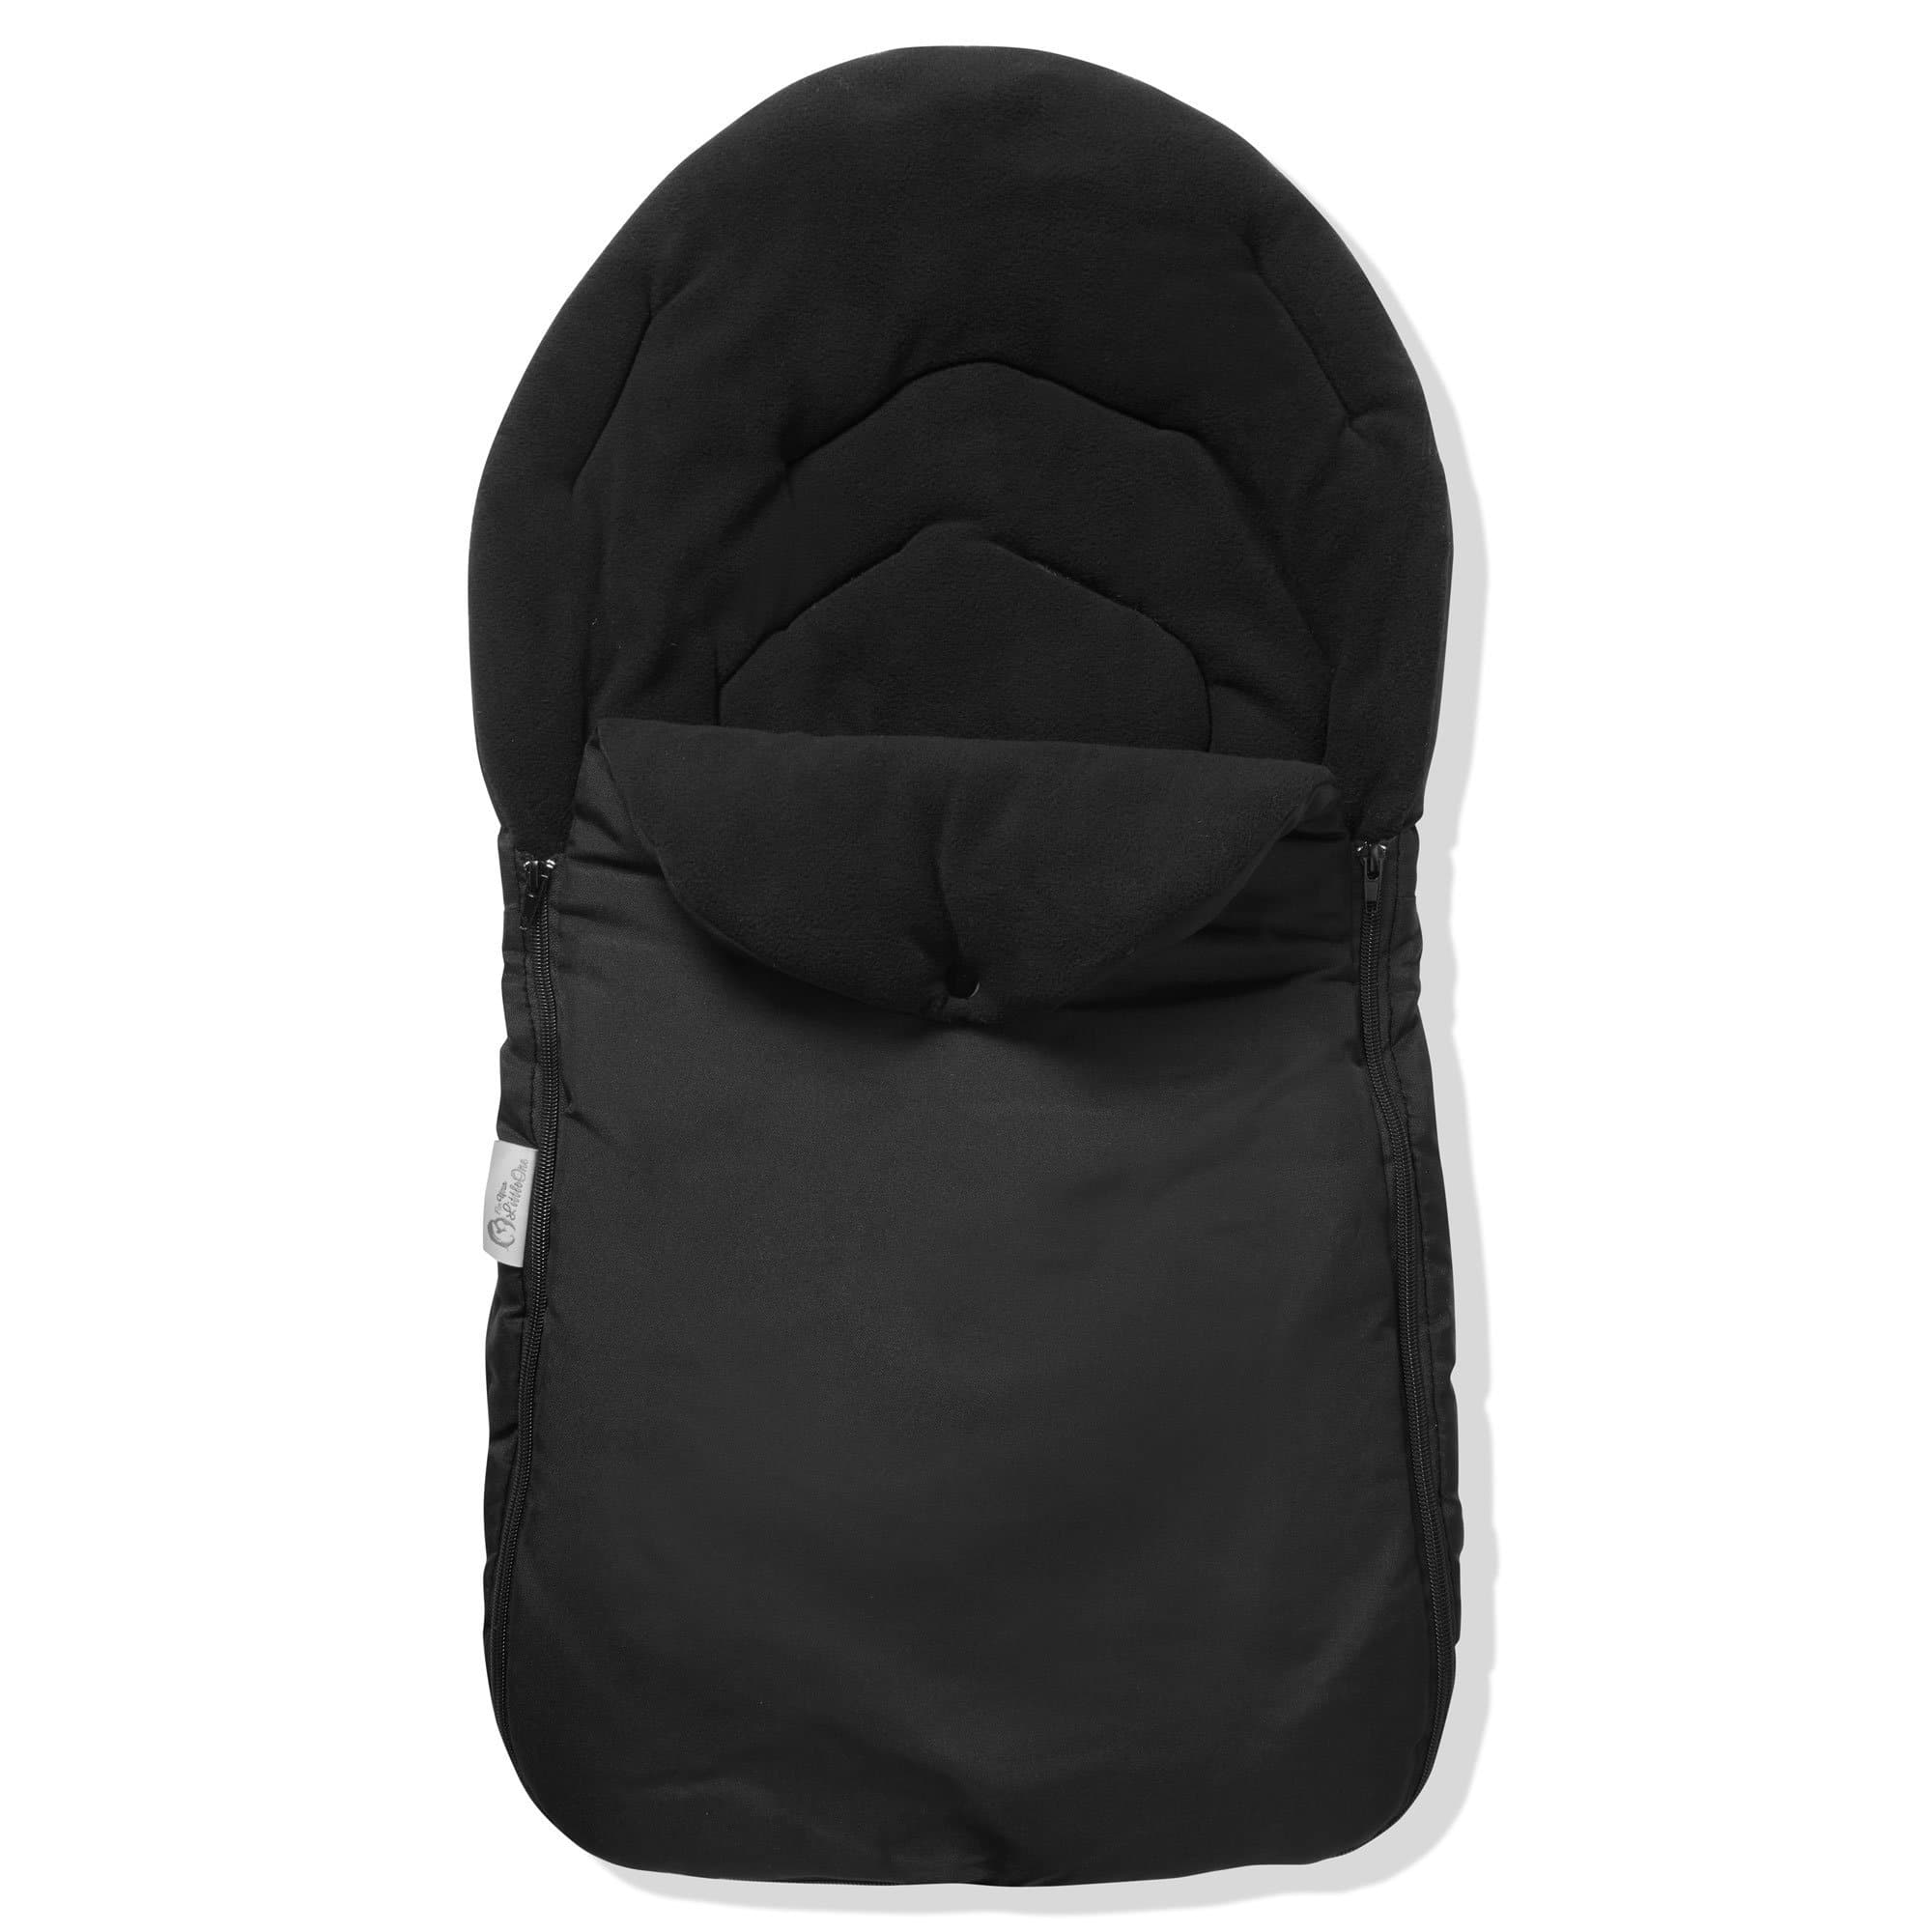 Car Seat Footmuff / Cosy Toes Compatible with Bebecar - Black / Fits All Models | For Your Little One